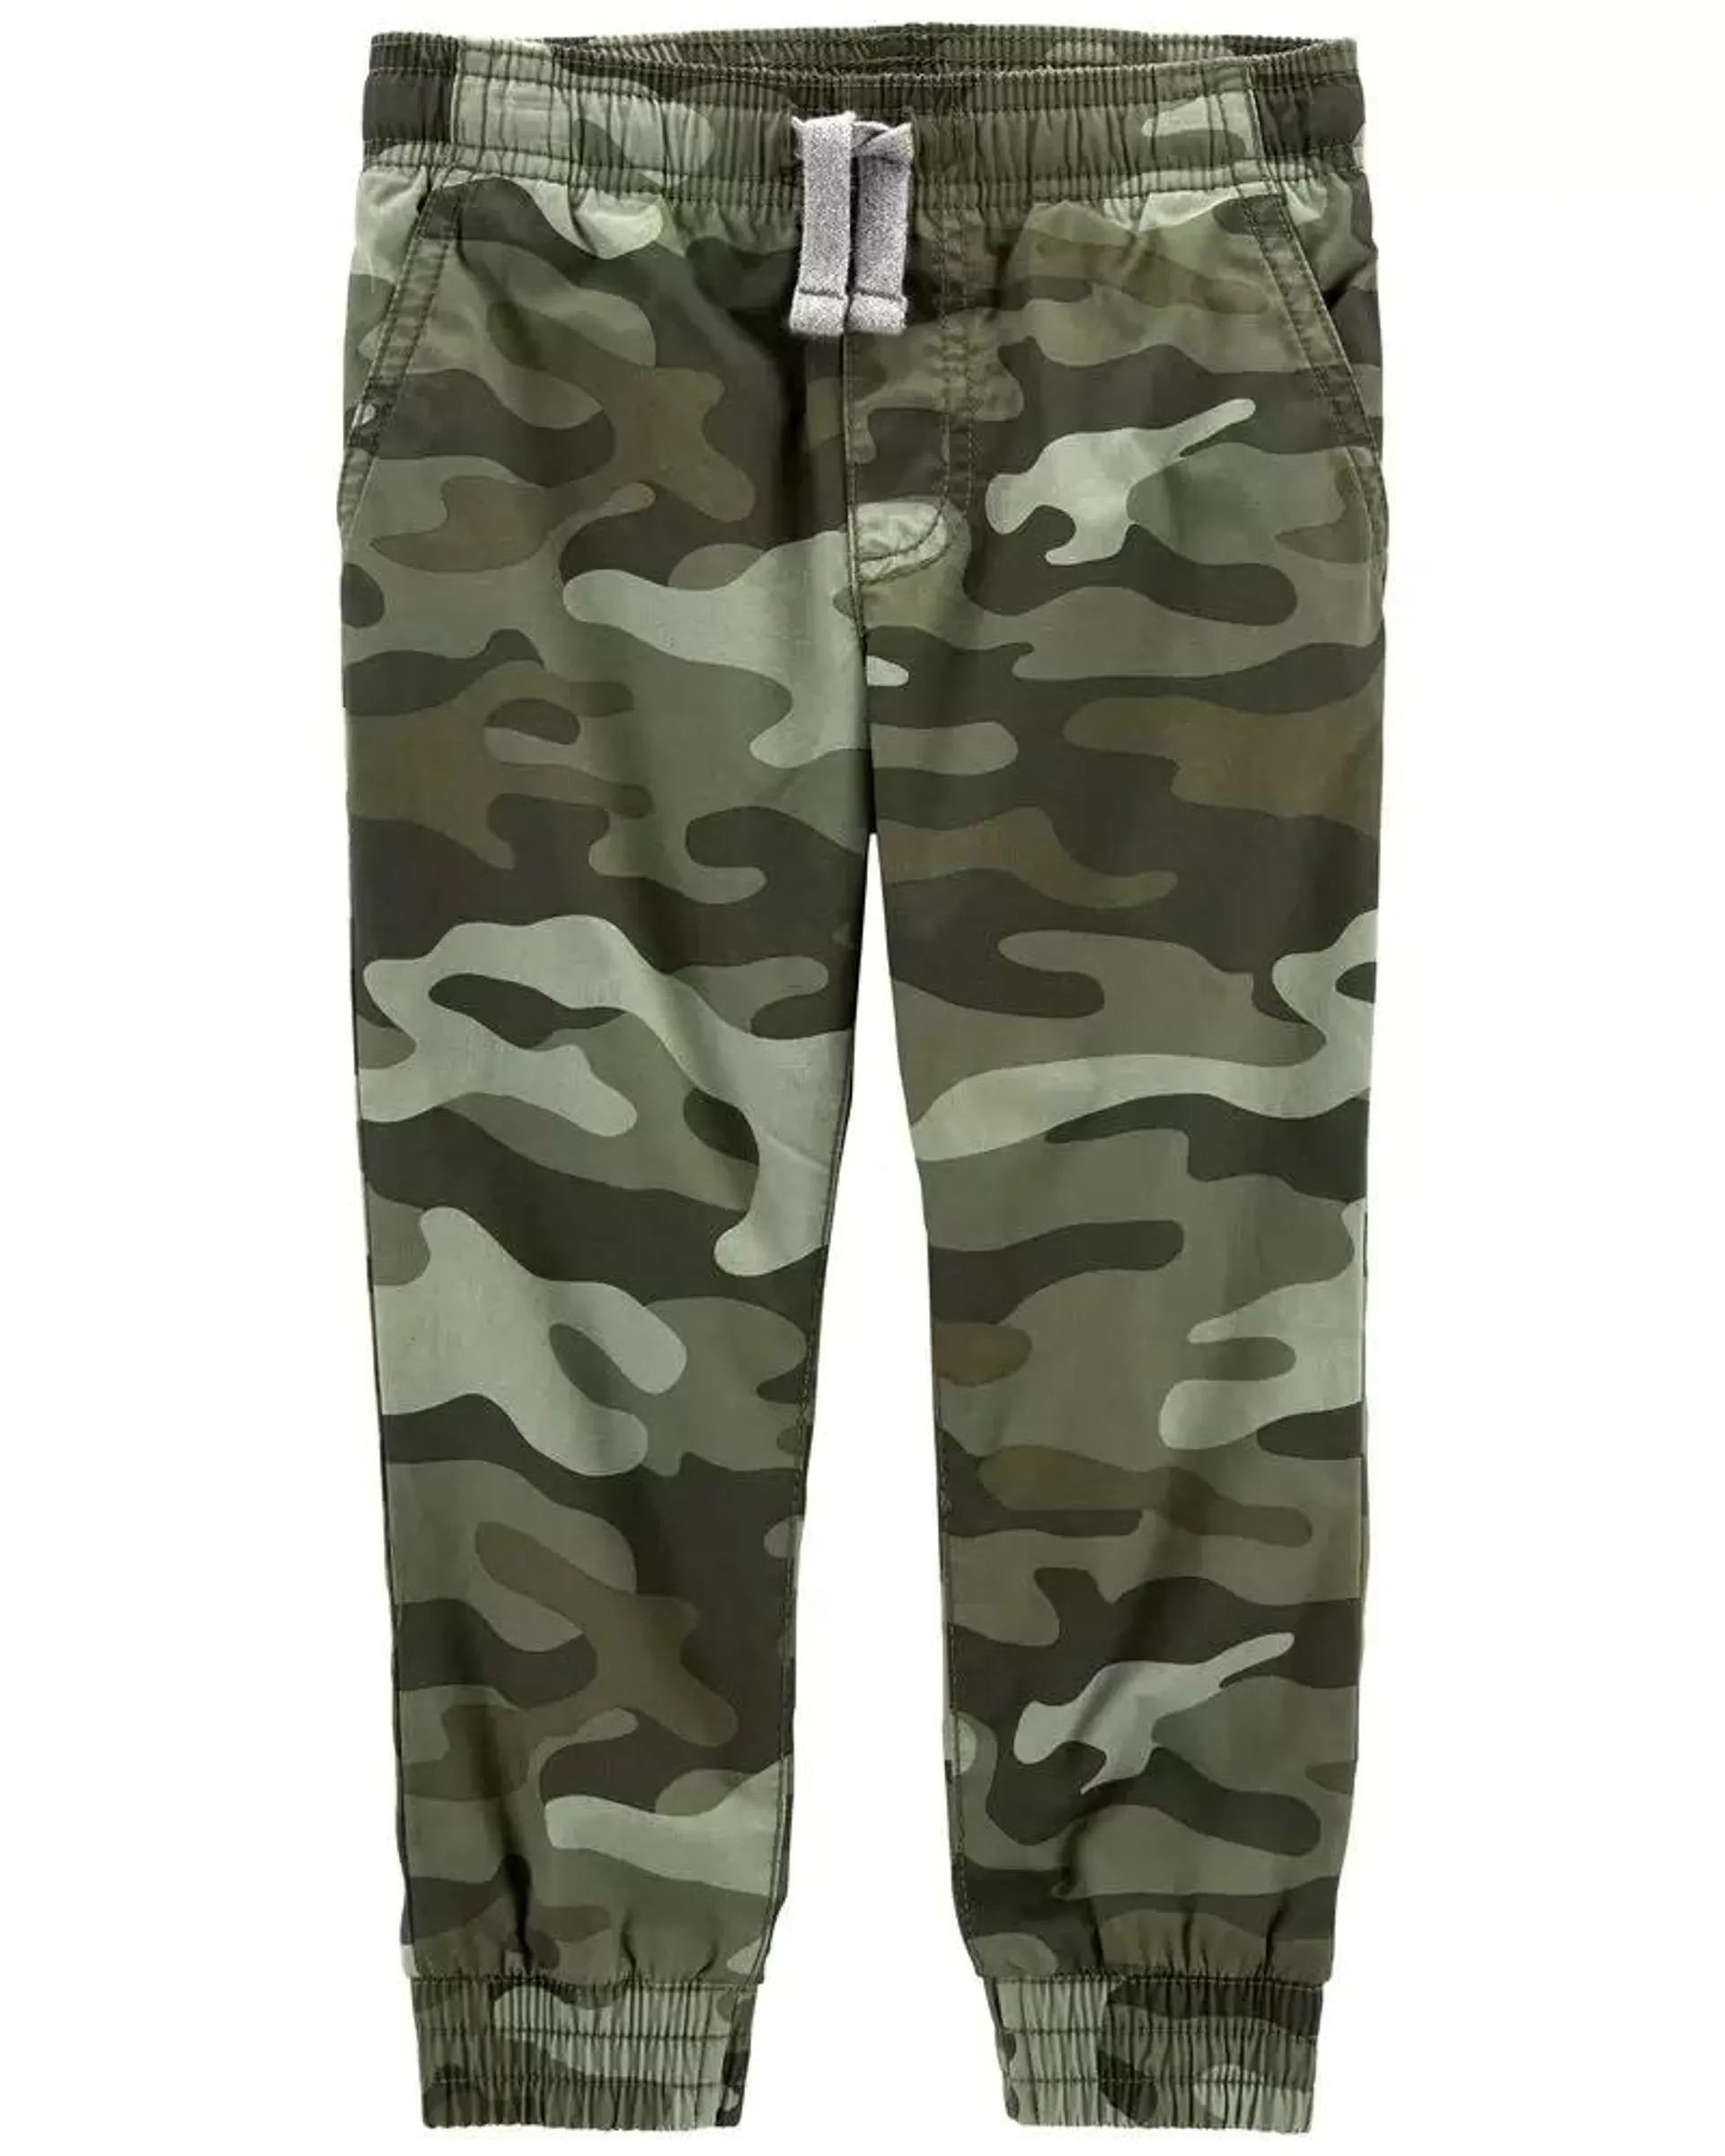 Toddler Camo Pull-On Poplin Lined Pants